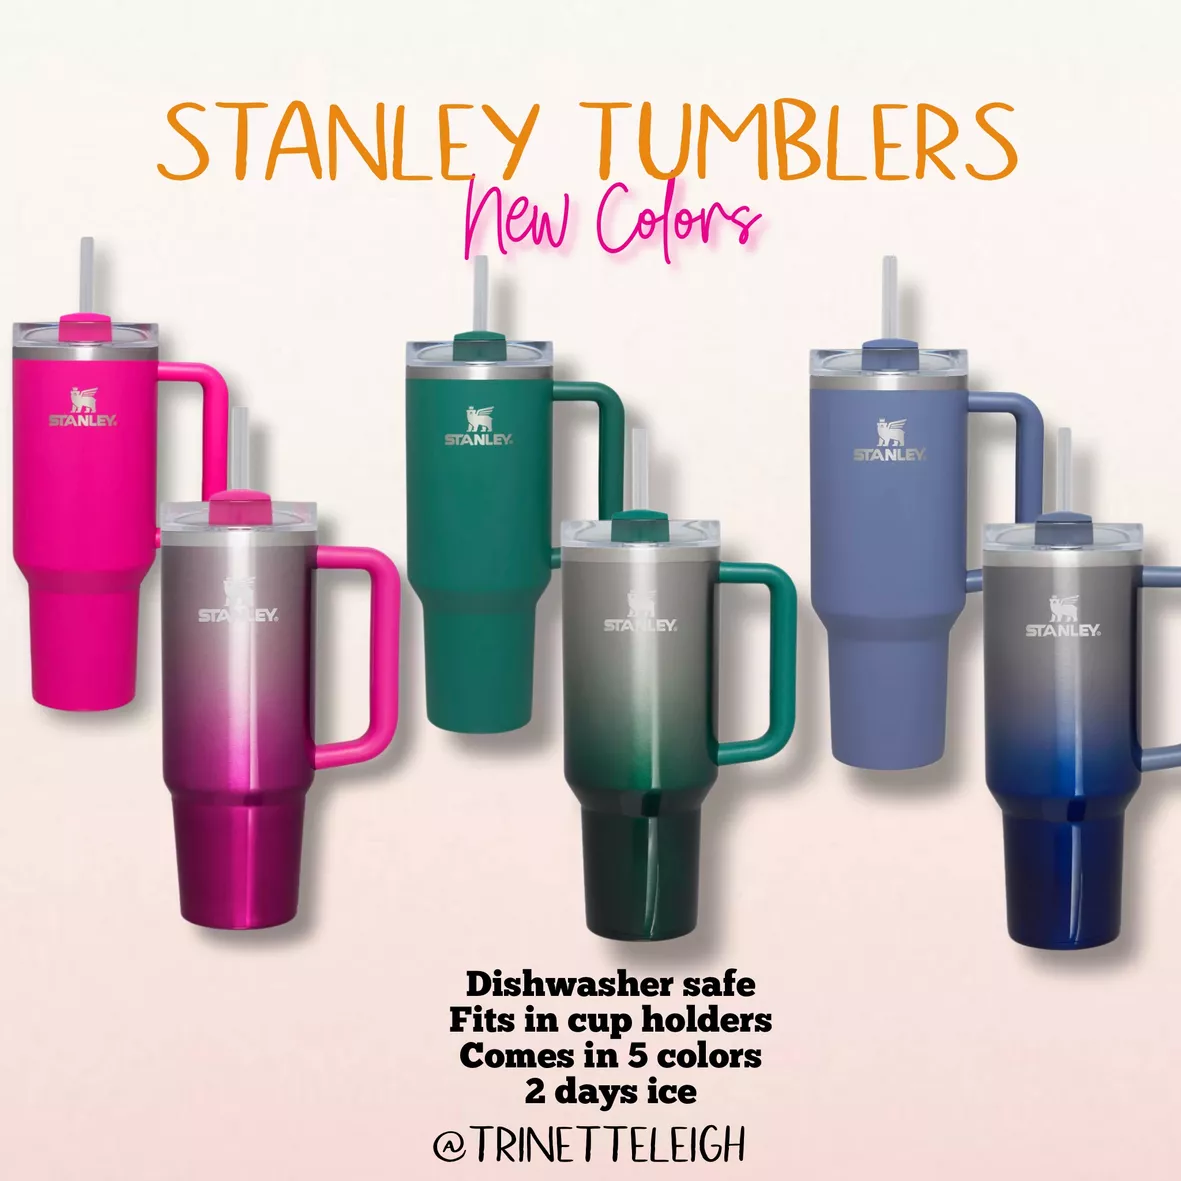 Stanley Adventure Quencher H2.0 Flowstate 40 oz Tumbler -  Camelia Pink Gradient: Tumblers & Water Glasses